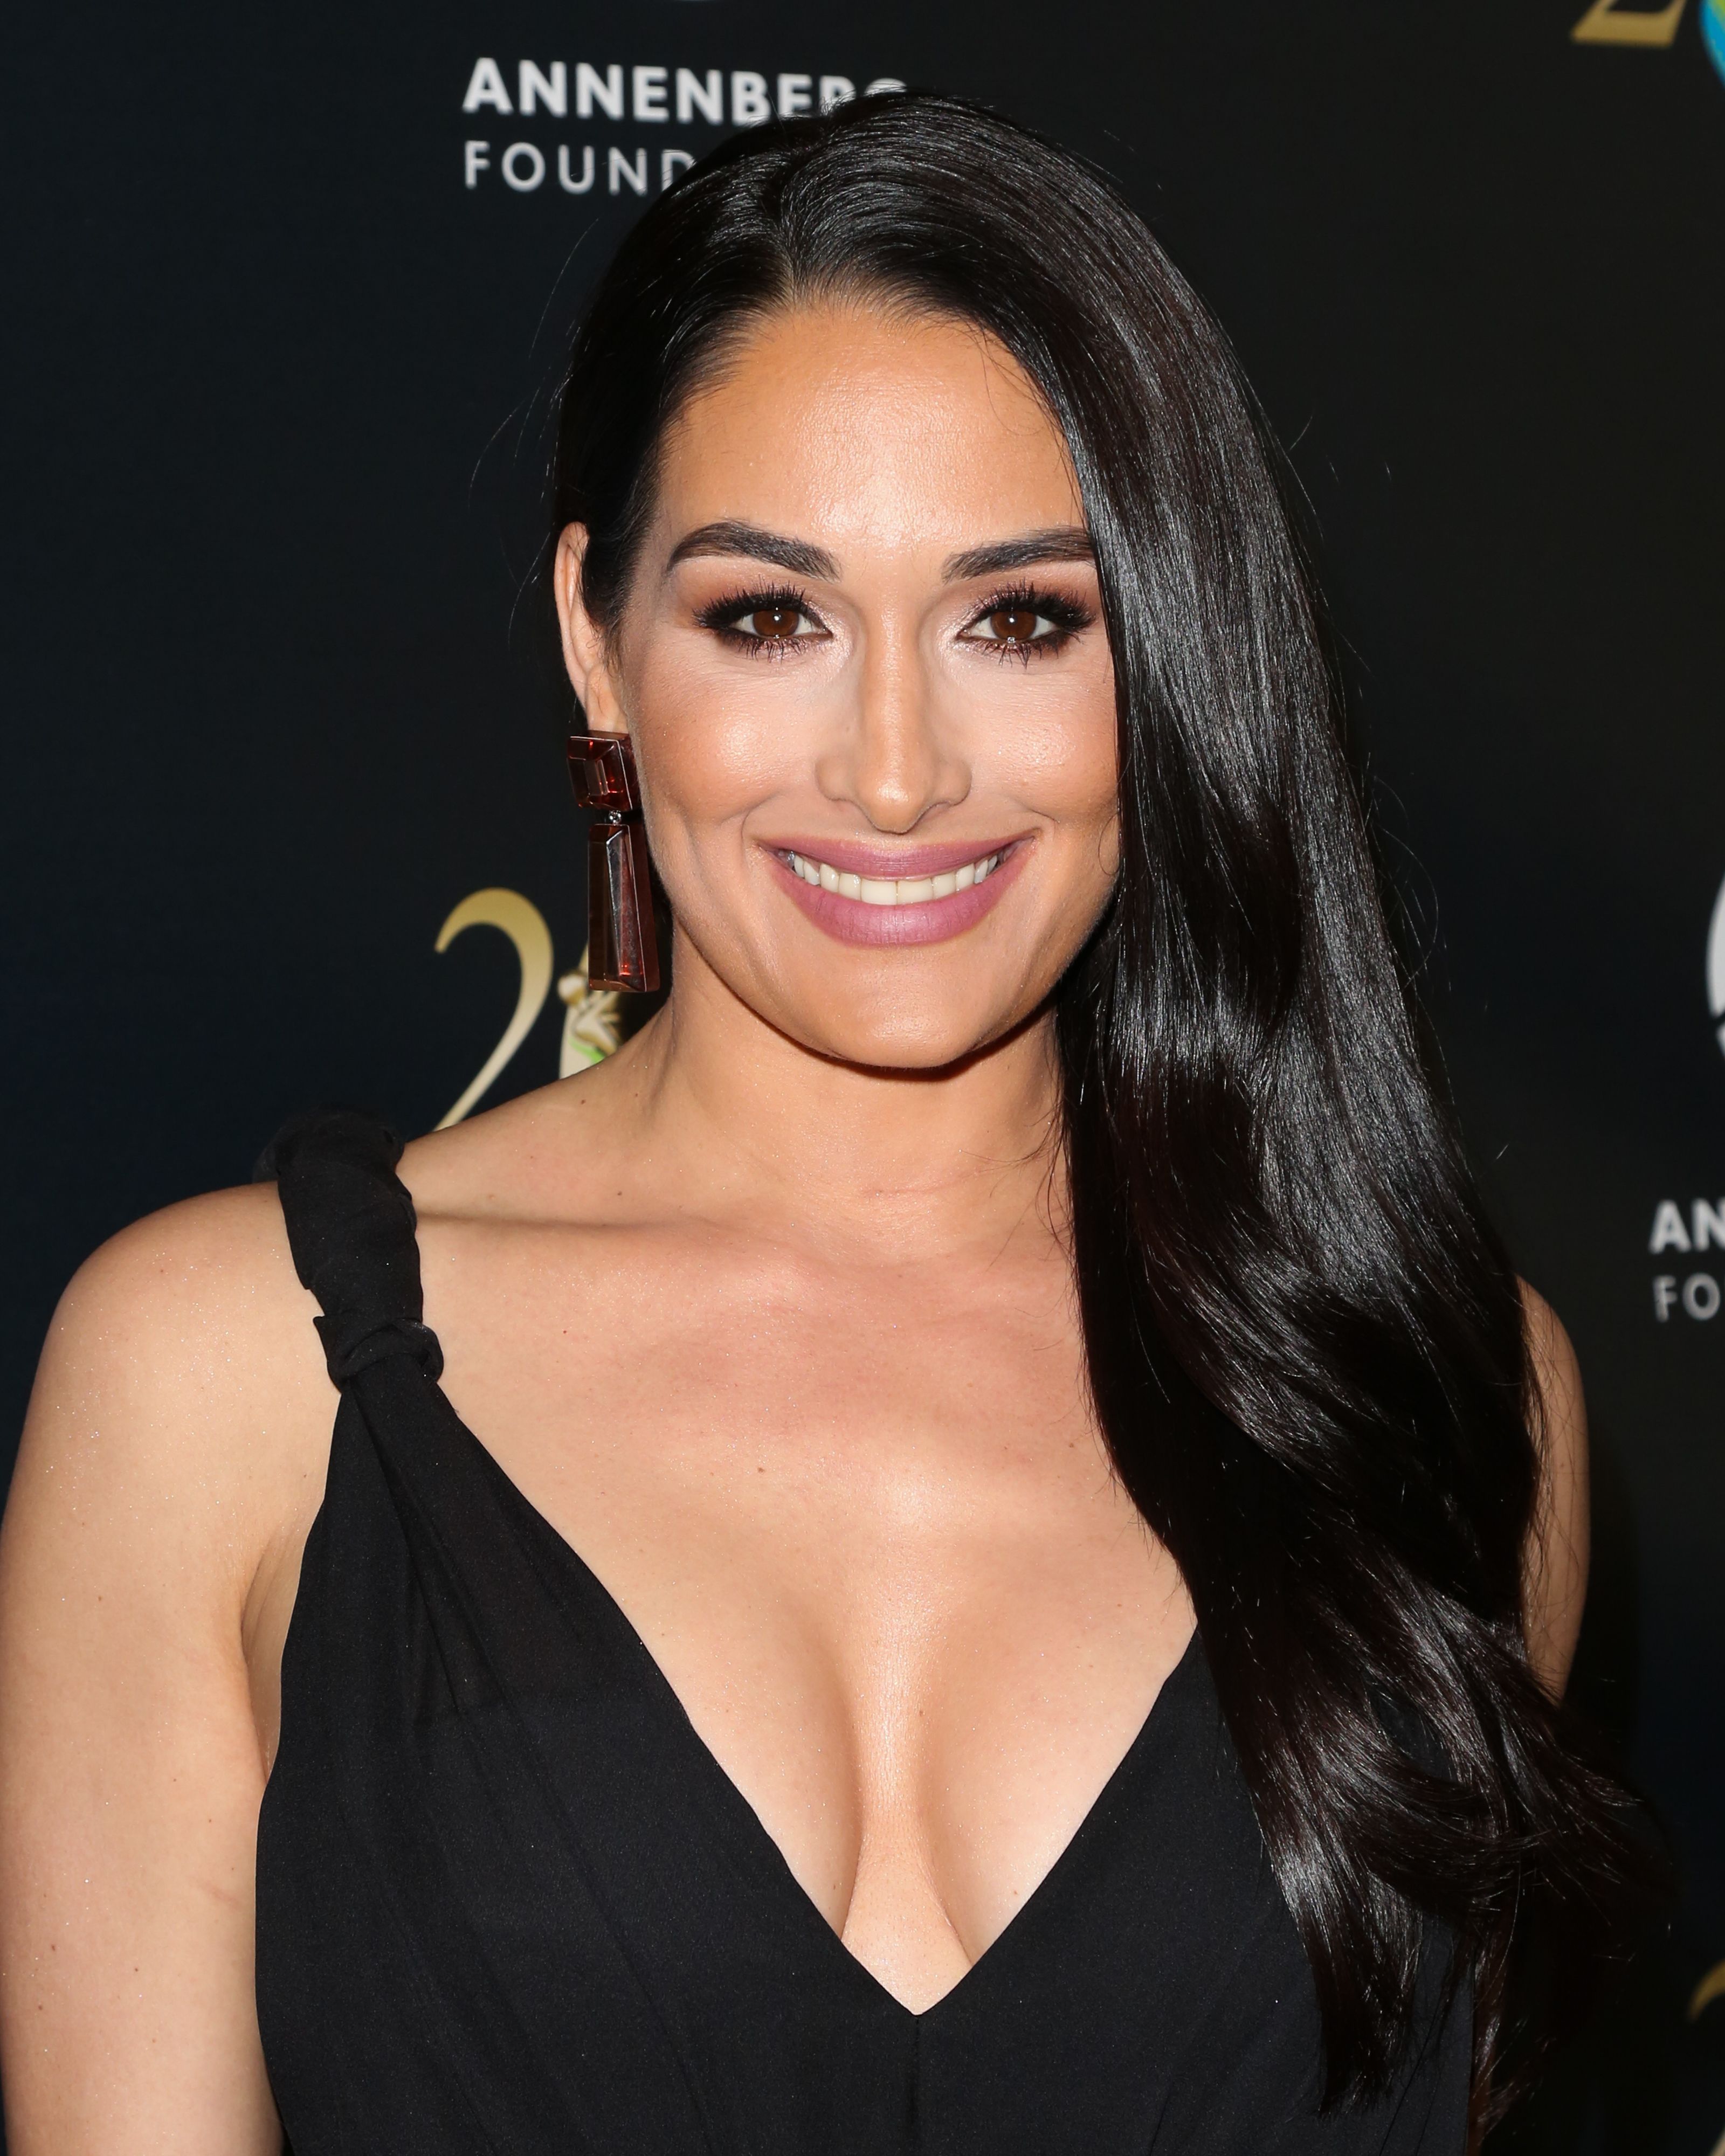 Wwe Sex Nikhi Bella Hd - Nikki Bella Is Officially Retiring From Wrestling And The WWE